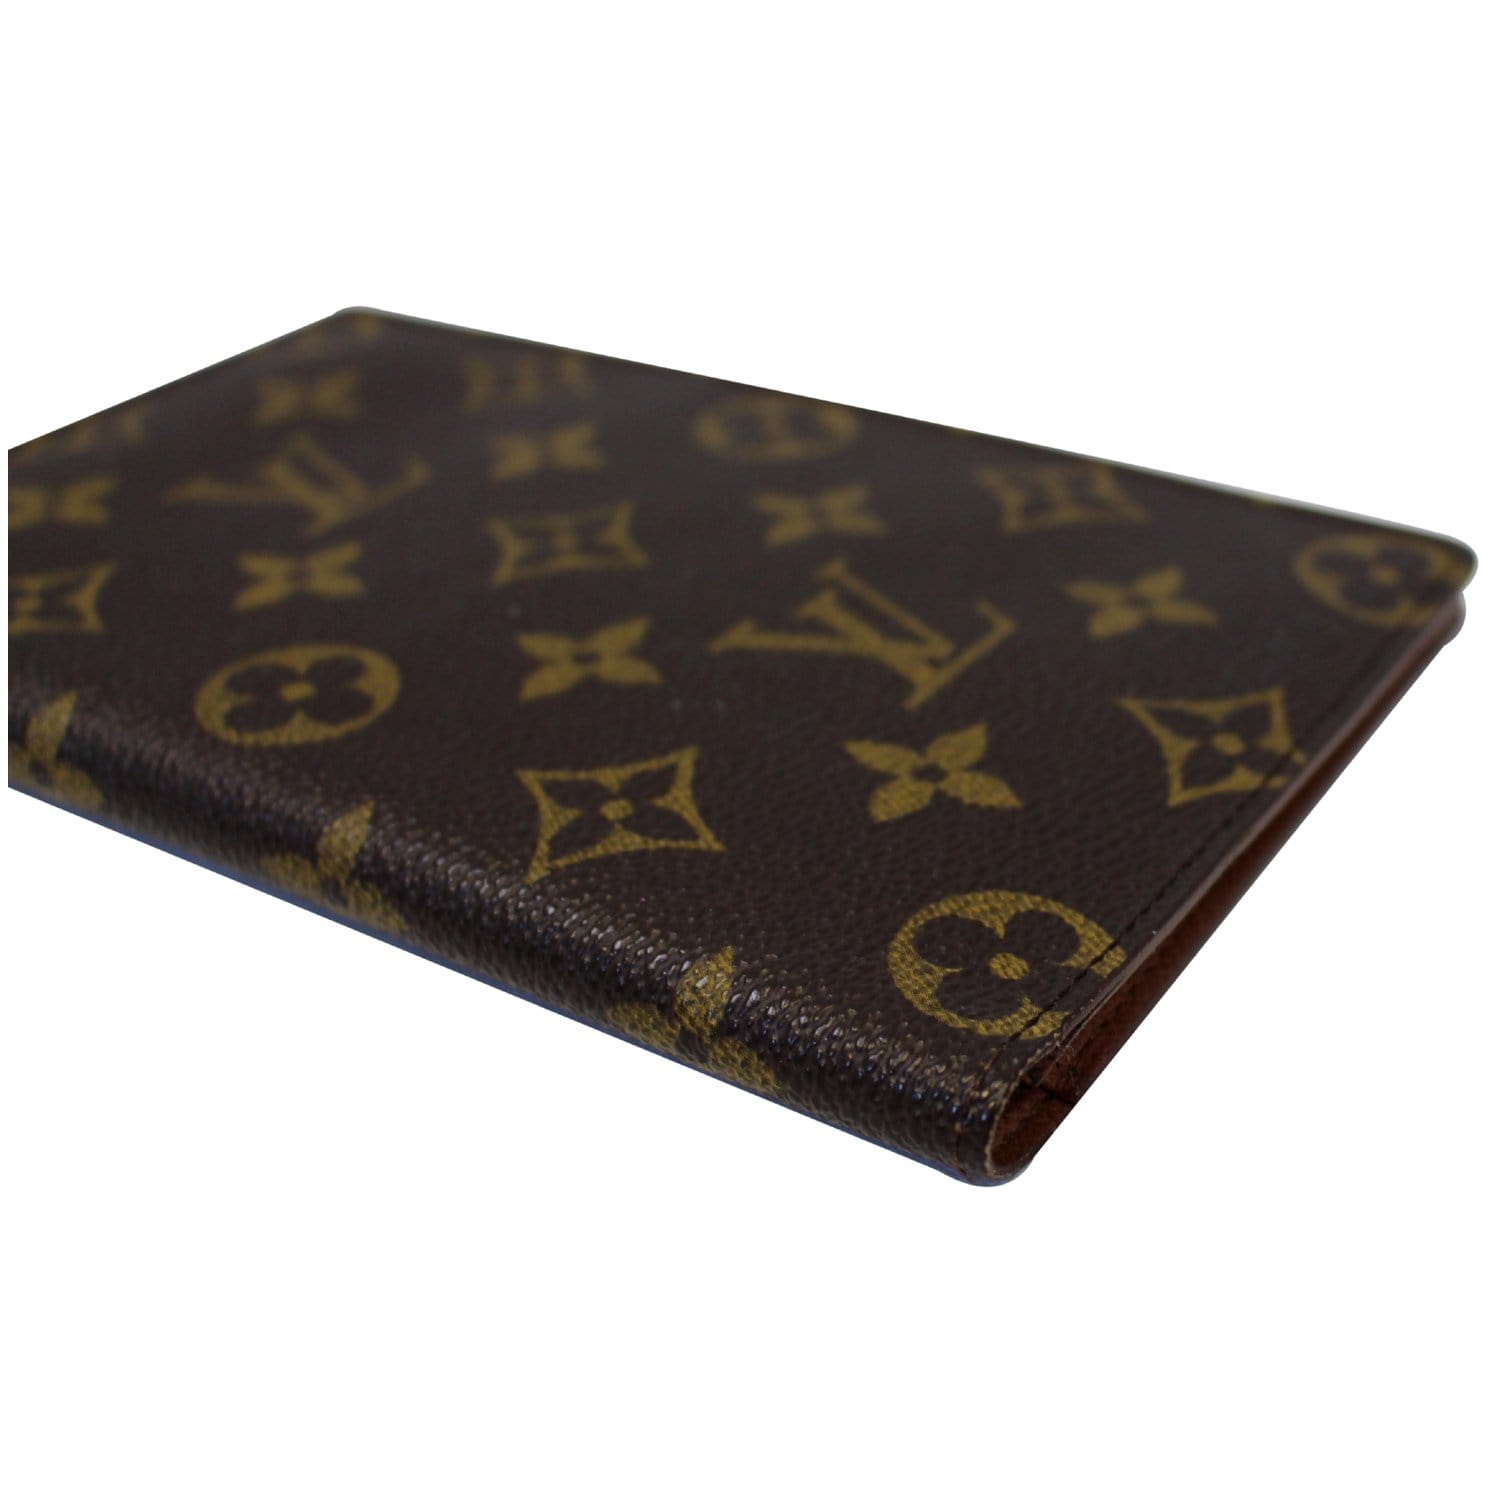 Passport Cover Monogram Canvas - Wallets and Small Leather Goods